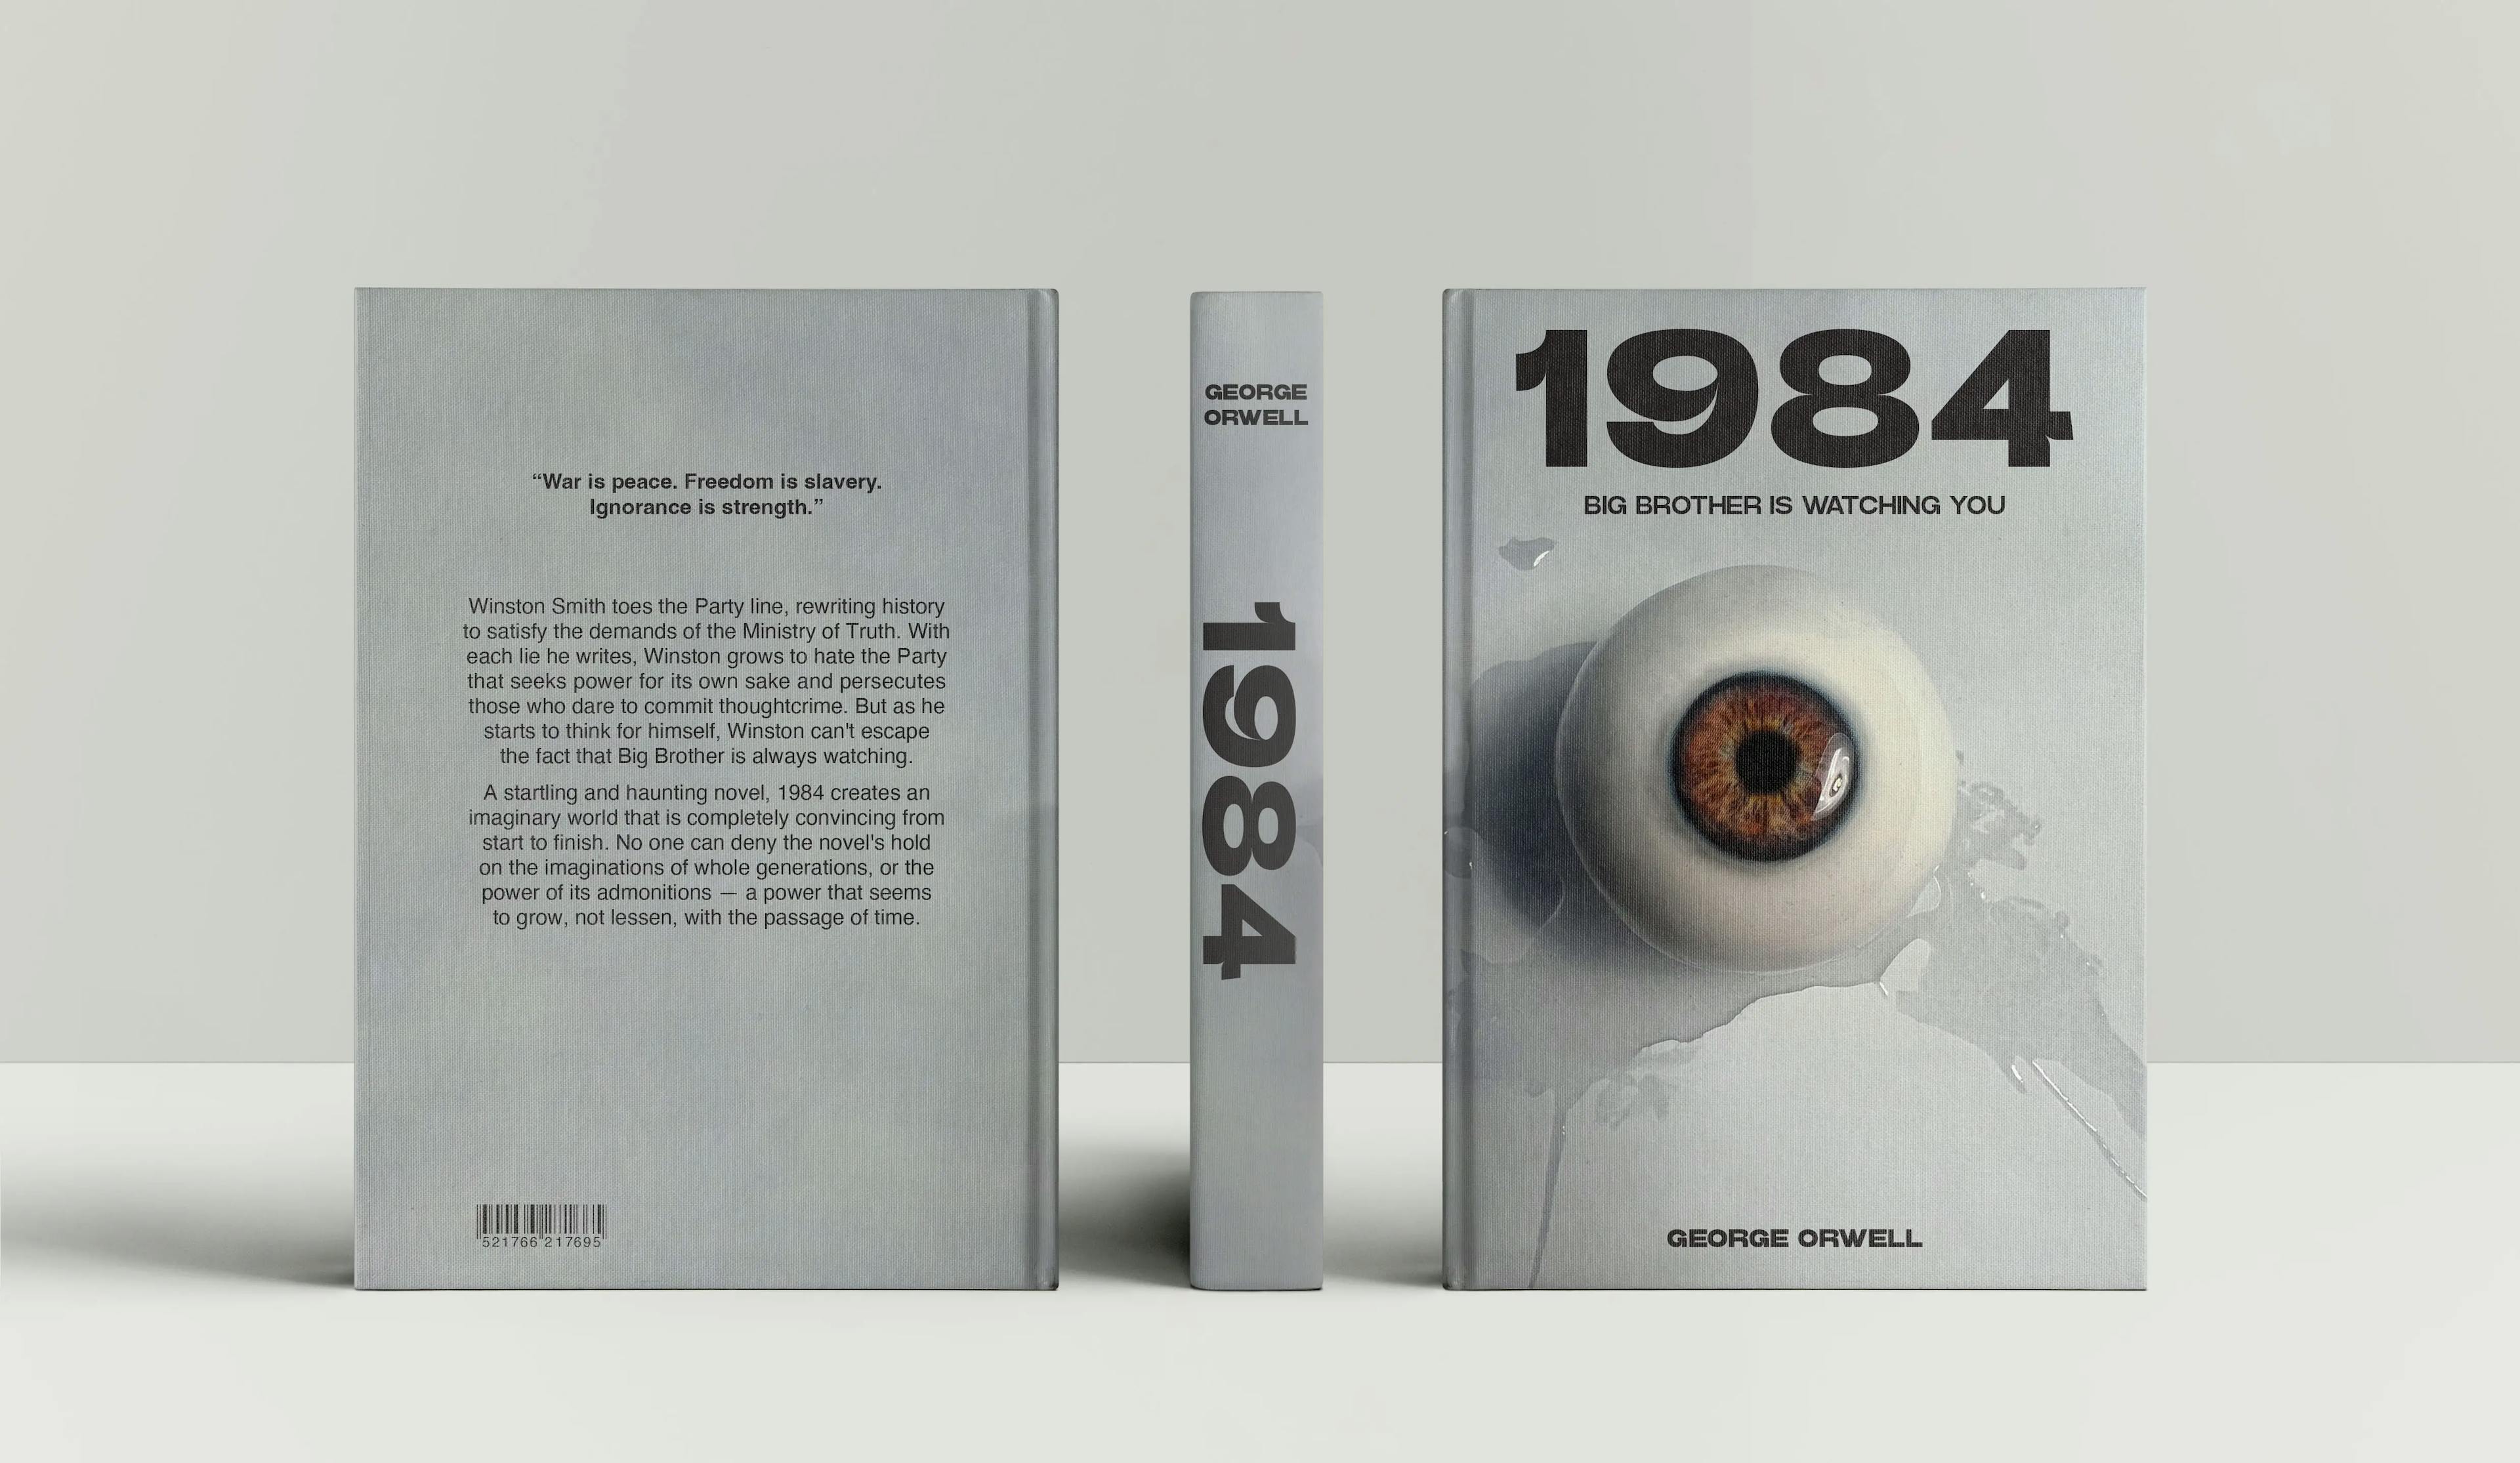 Book Design I designed for the Nineteen Eighty Four Book as a Graphic Designer